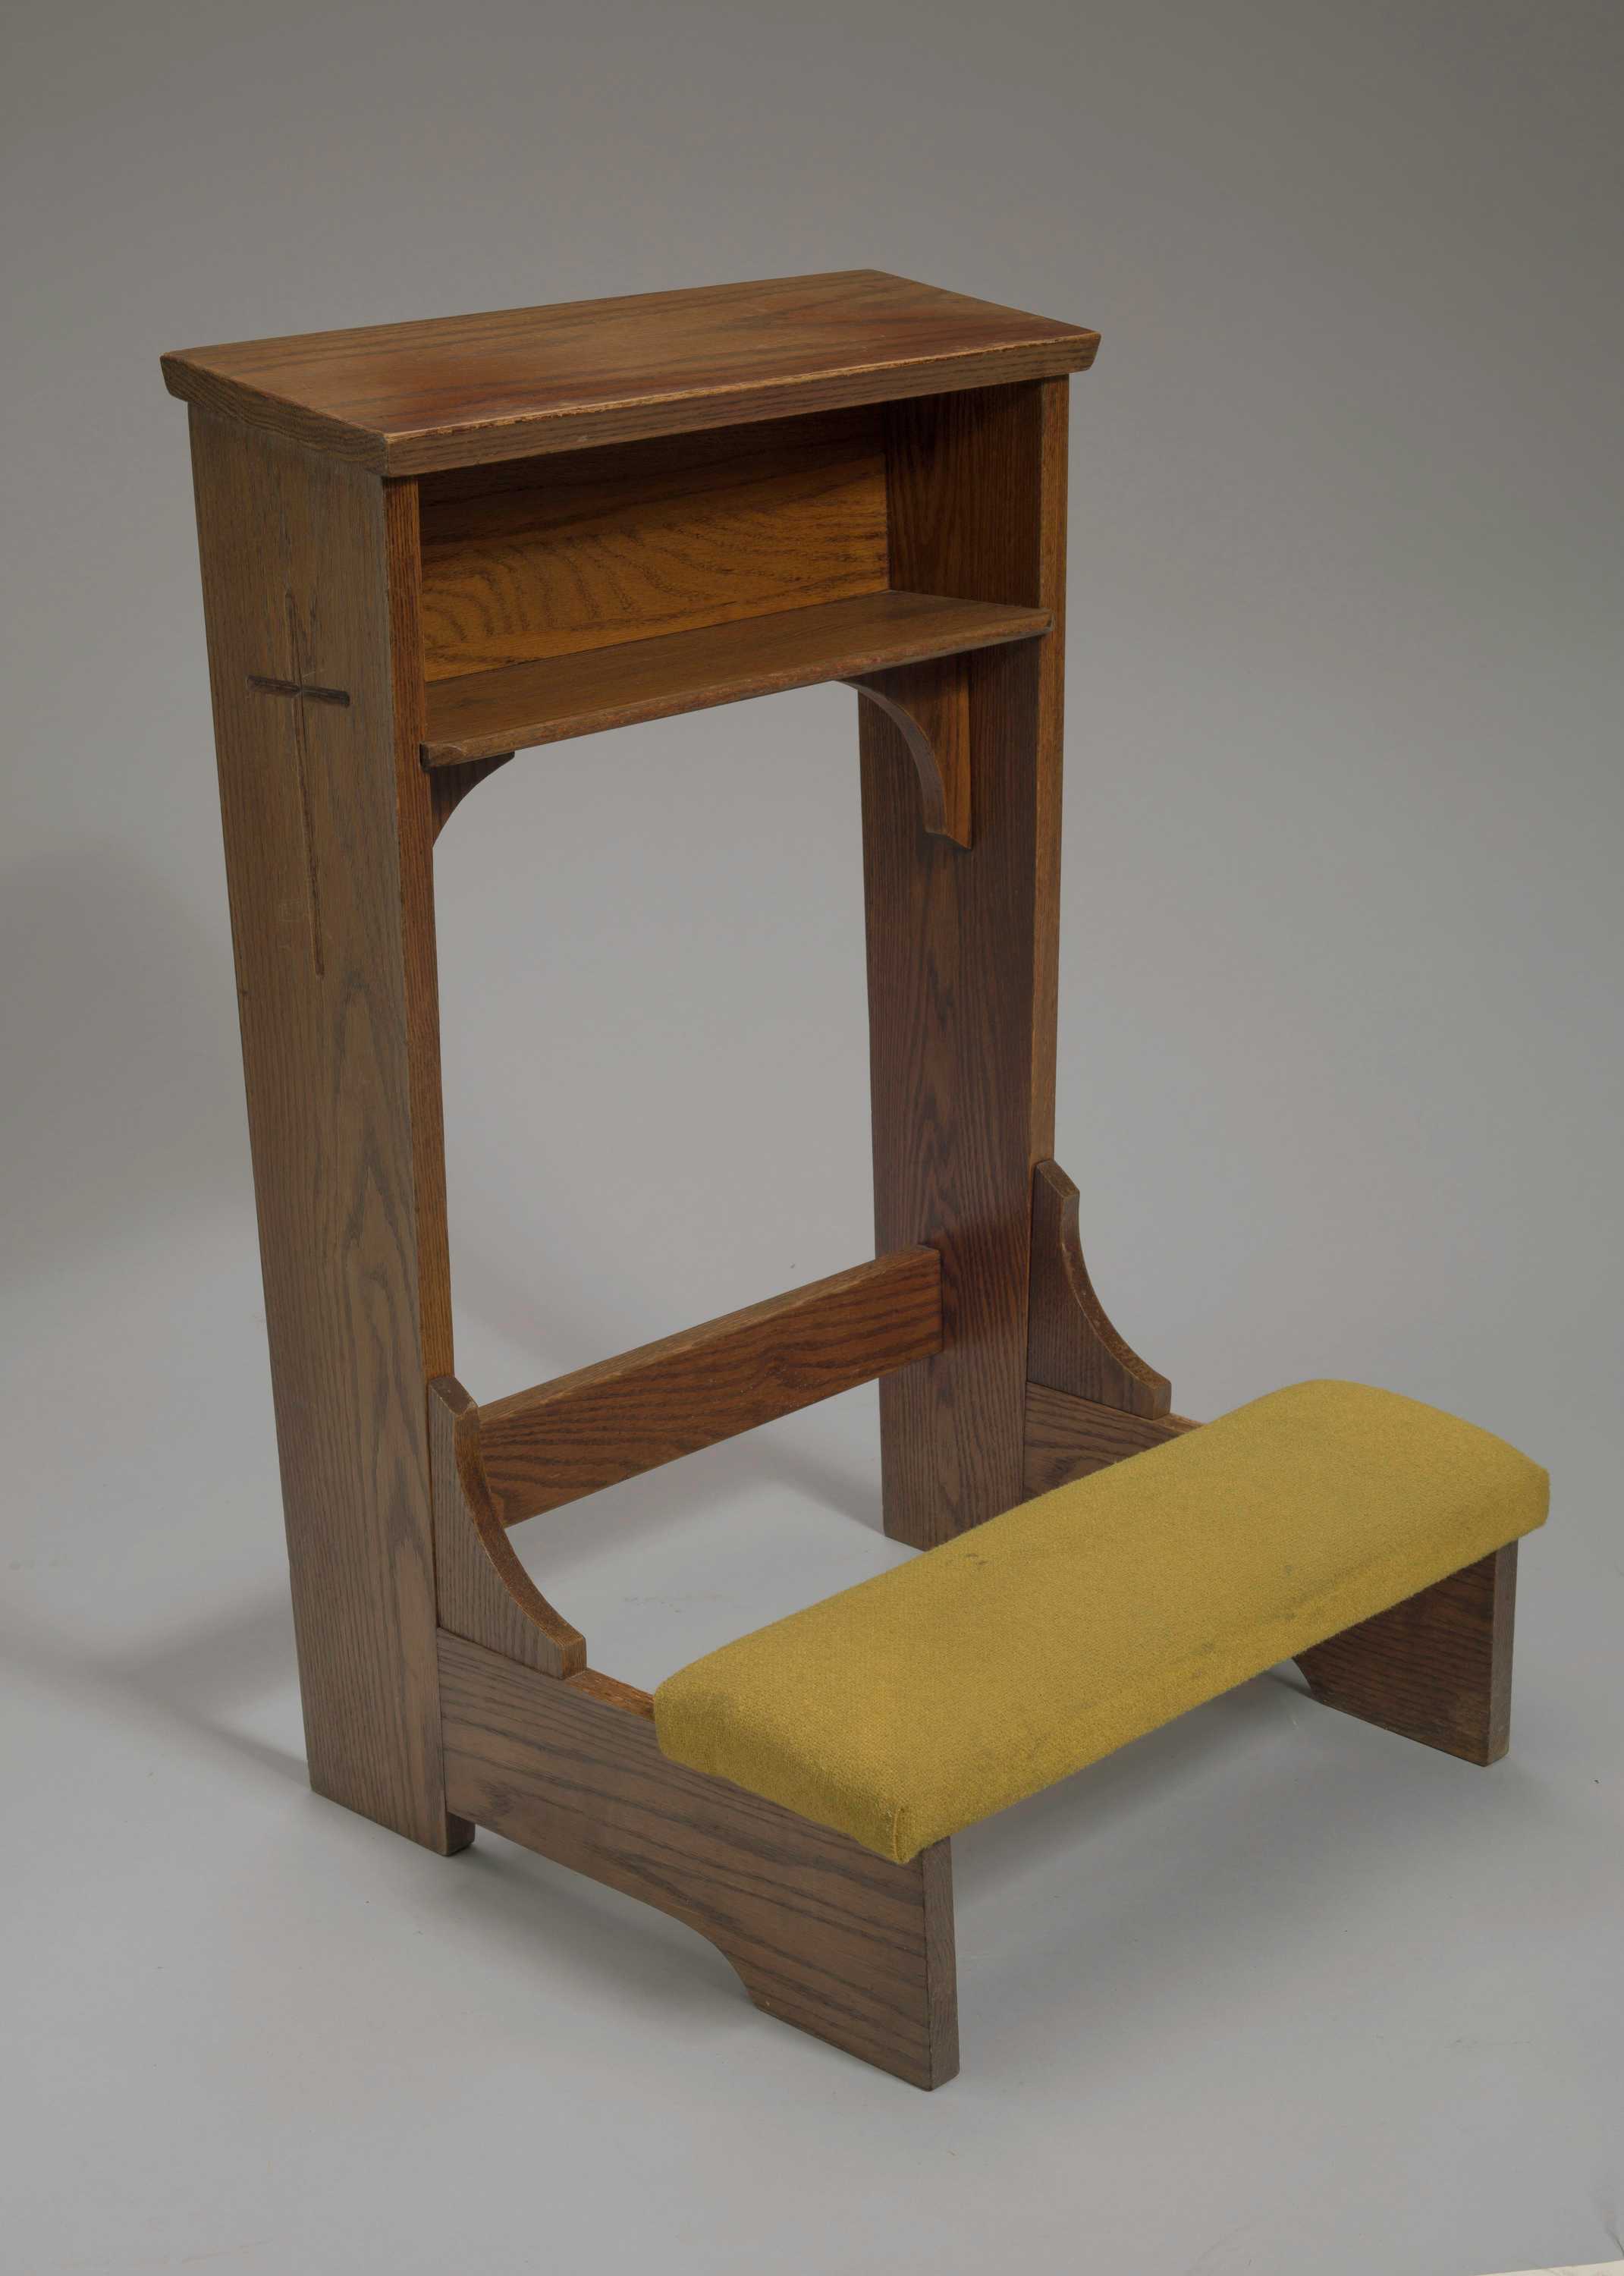 A wood kneeling altar with a yellow-green padded knee rest. The altar has small cubbyhole under the top shelf. The shelf is slightly tilted down toward the knee pads. The bottom of the shelf and cubbyhole are supported by two curved arches on either side, attached to the side planks. On either side of the altar at the top of the side planks is a carved cross. A small rectangular support board is near the base of the altar and connects the two side planks. Kneepads are attached to the fixed base with two solid horizontal planks on either side. A small, wood, inverted arch support connects the knee rest to the vertical side planks.